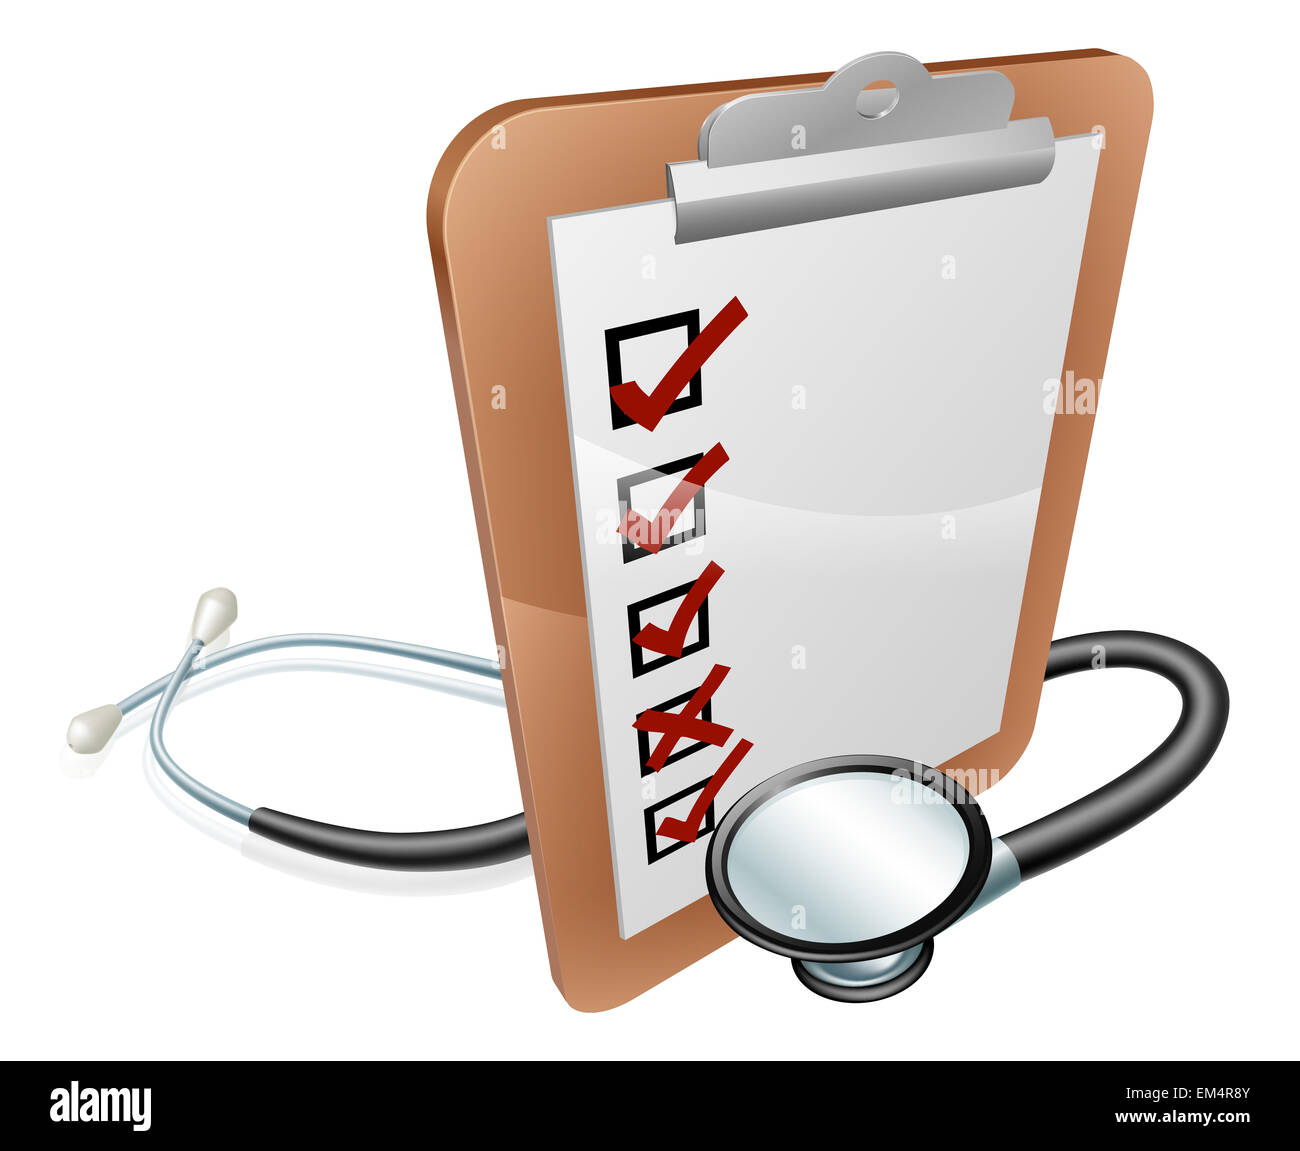 Clip Board and Stethoscope conceptual illustration. Could relate to medical test results, hospital administration, feedback or s Stock Photo